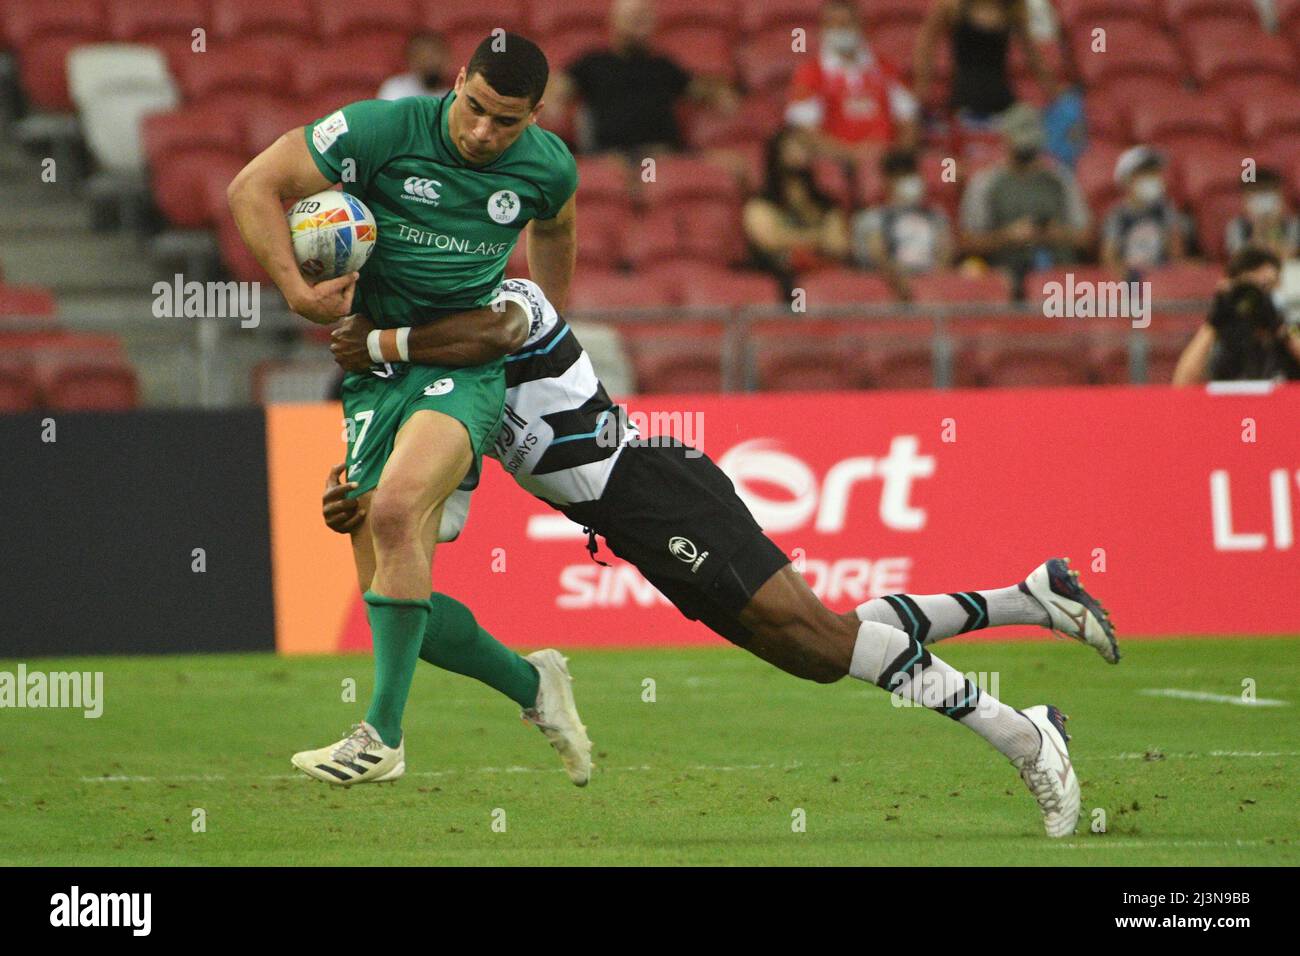 Singapore. 9th Apr, 2022. Jordan Conroy (L) of Ireland competes during the Pool D match between Ireland and Fiji at the HSBC World Rugby Sevens Singapore stop, held in the National Stadium on April 9, 2022. Credit: Then Chih Wey/Xinhua/Alamy Live News Stock Photo